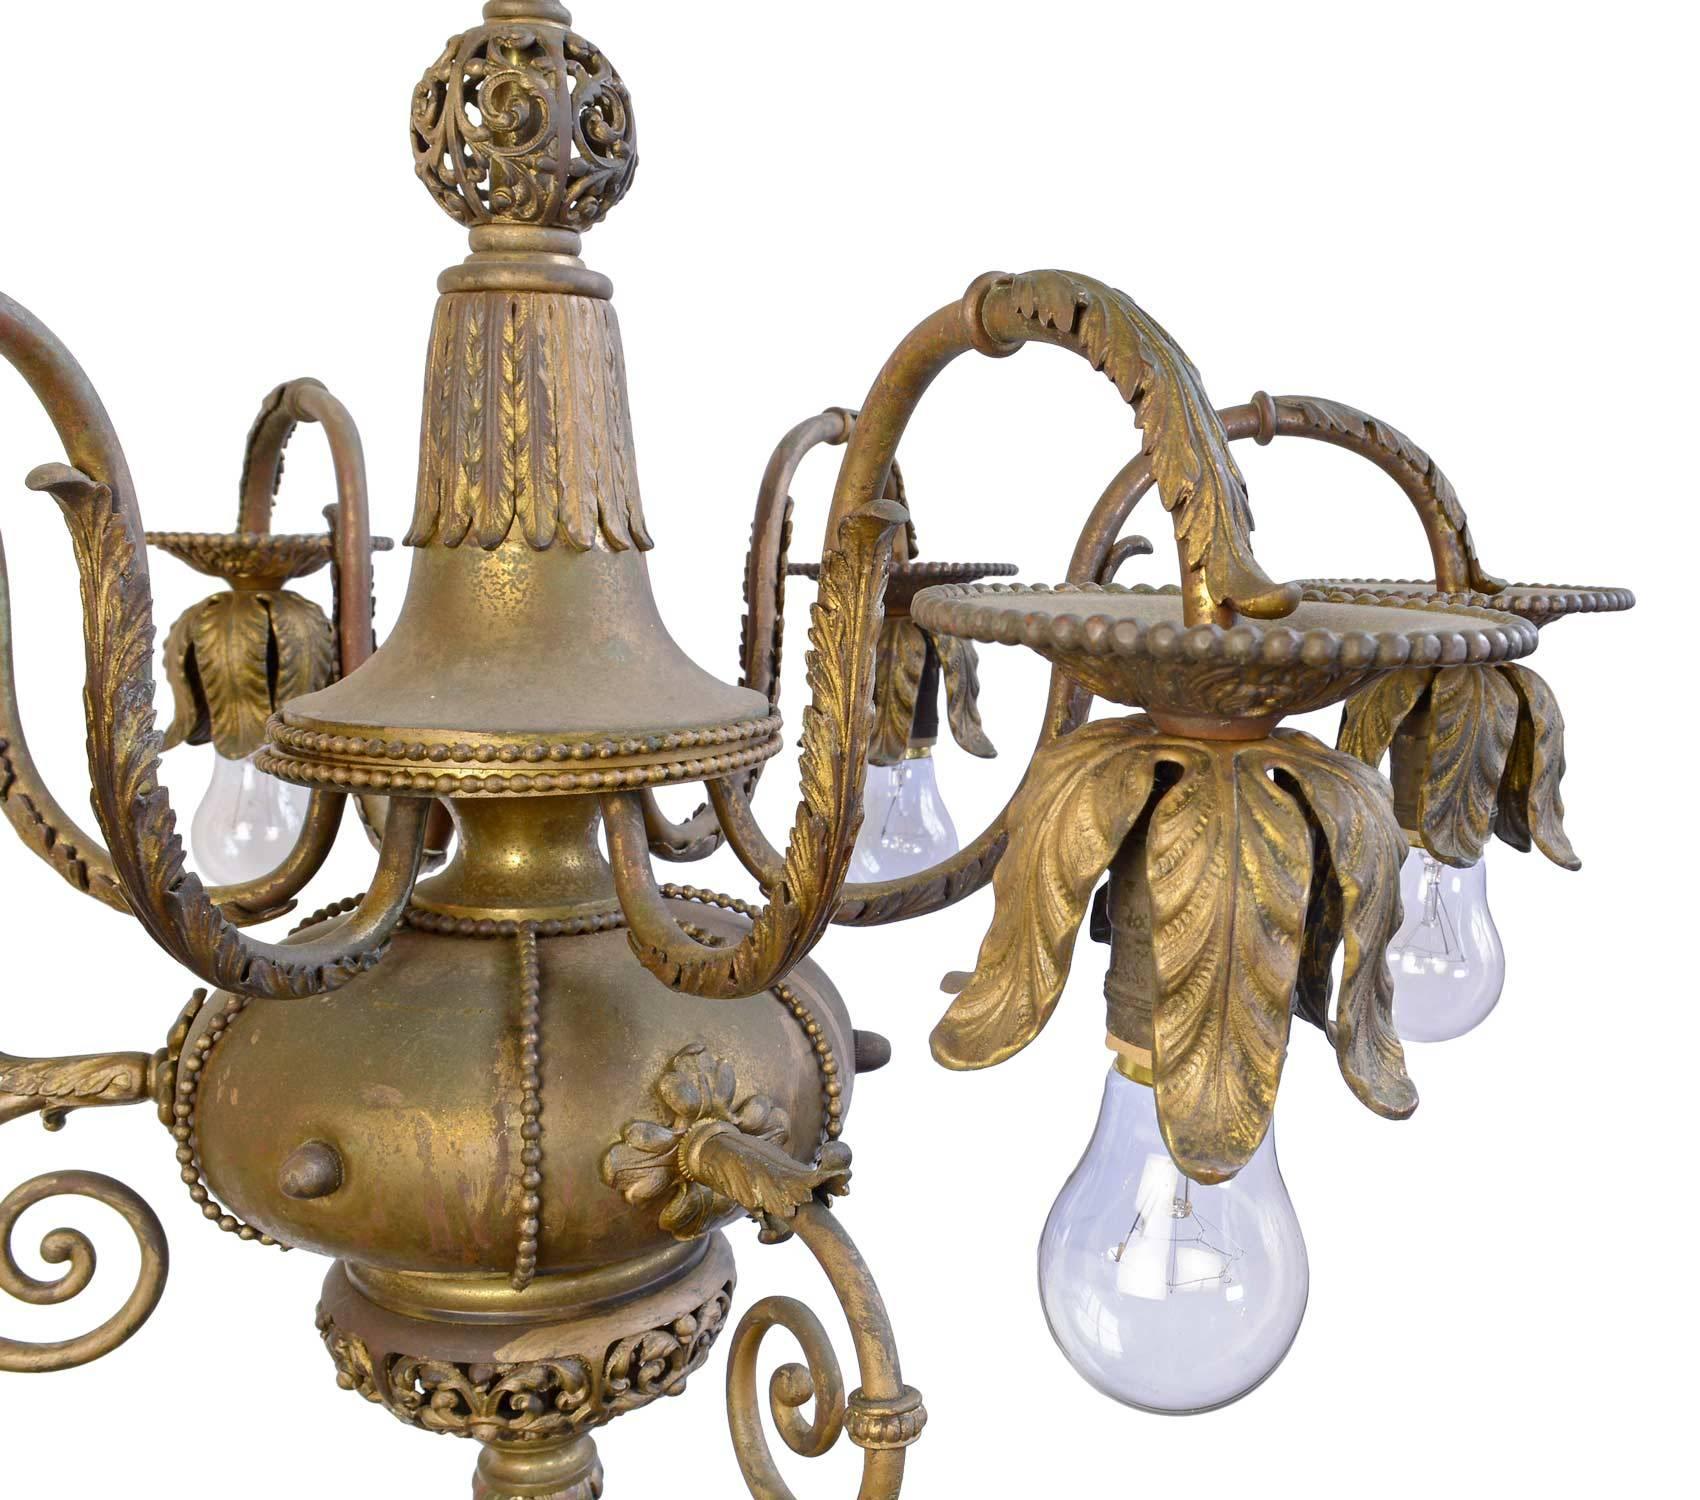 Cast Early 1890s American Silver Plated Six-Candle Chandelier with Filigree